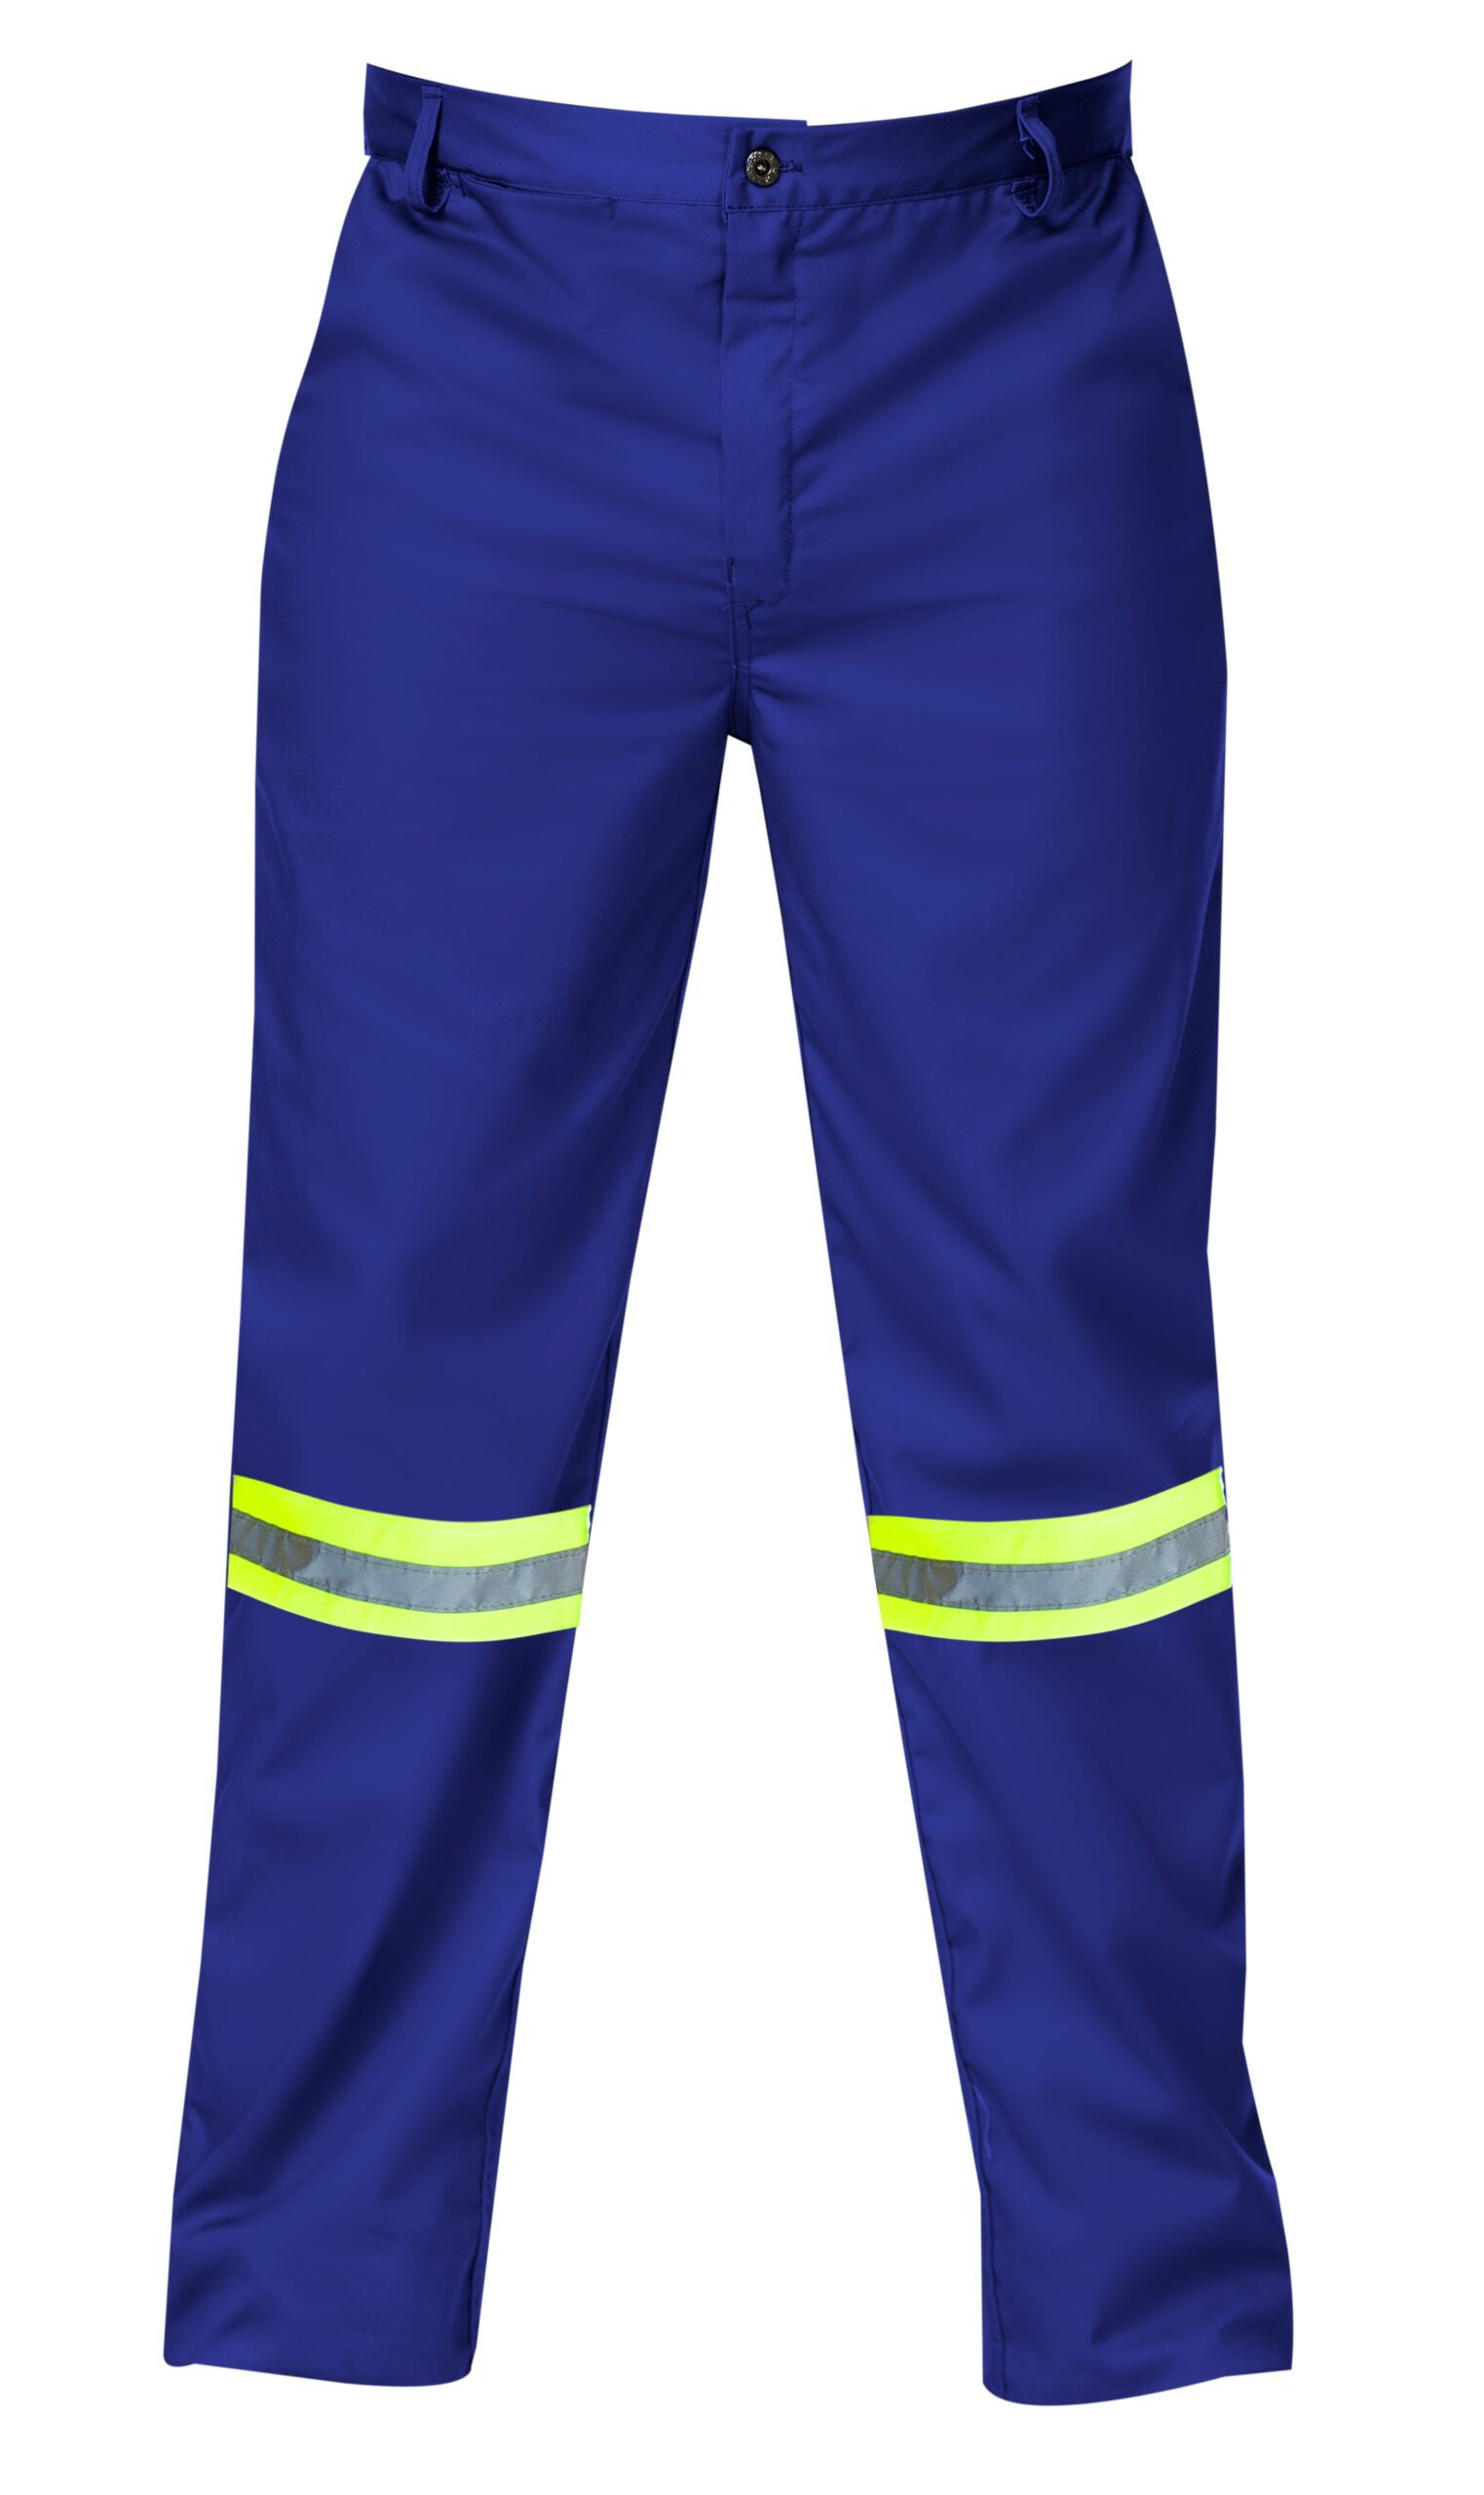 J54 100% Cotton SABS Approved Conti Suit - Endurance Workwear